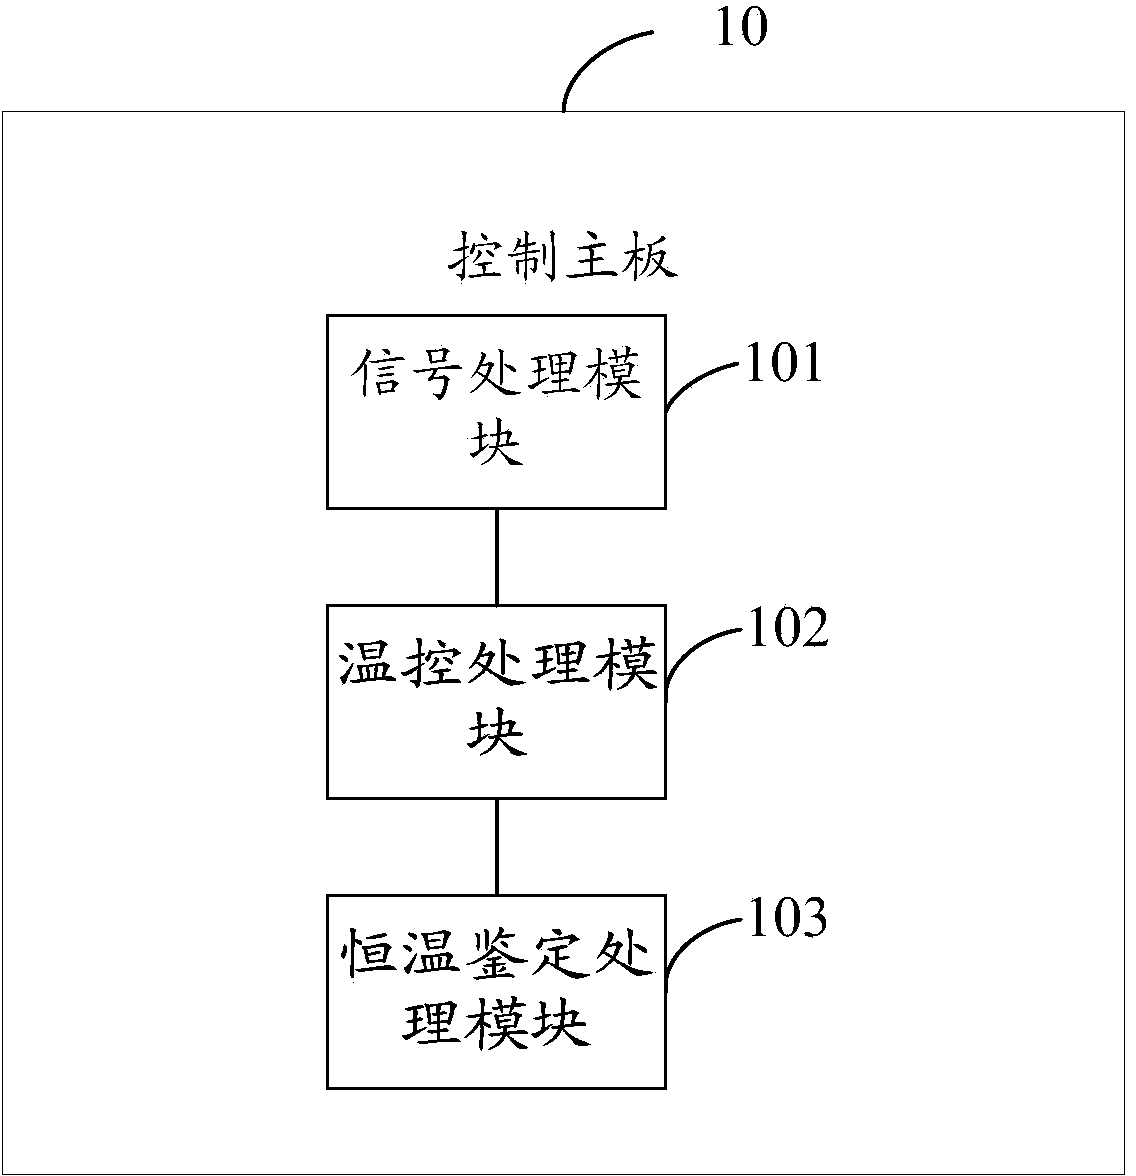 Heating boiler temperature control system and method